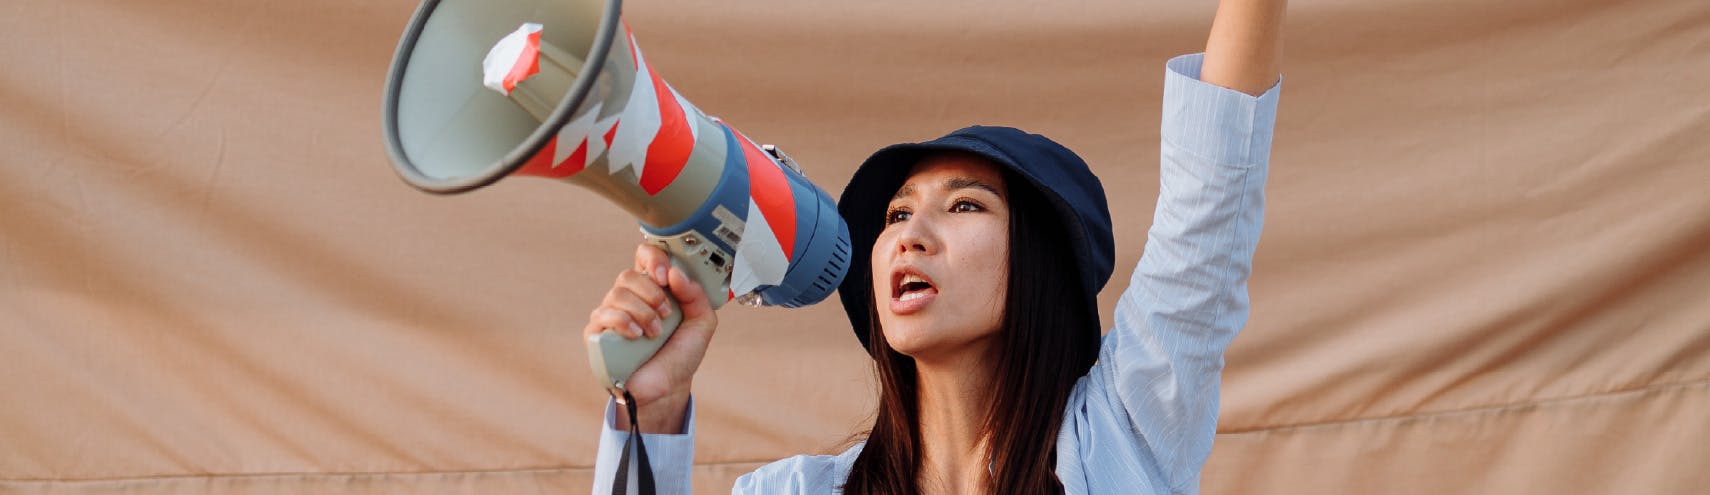 Woman holding a megaphone with one hand raising her other hand up as she shouts, "Long Live the Spreadsheet!"